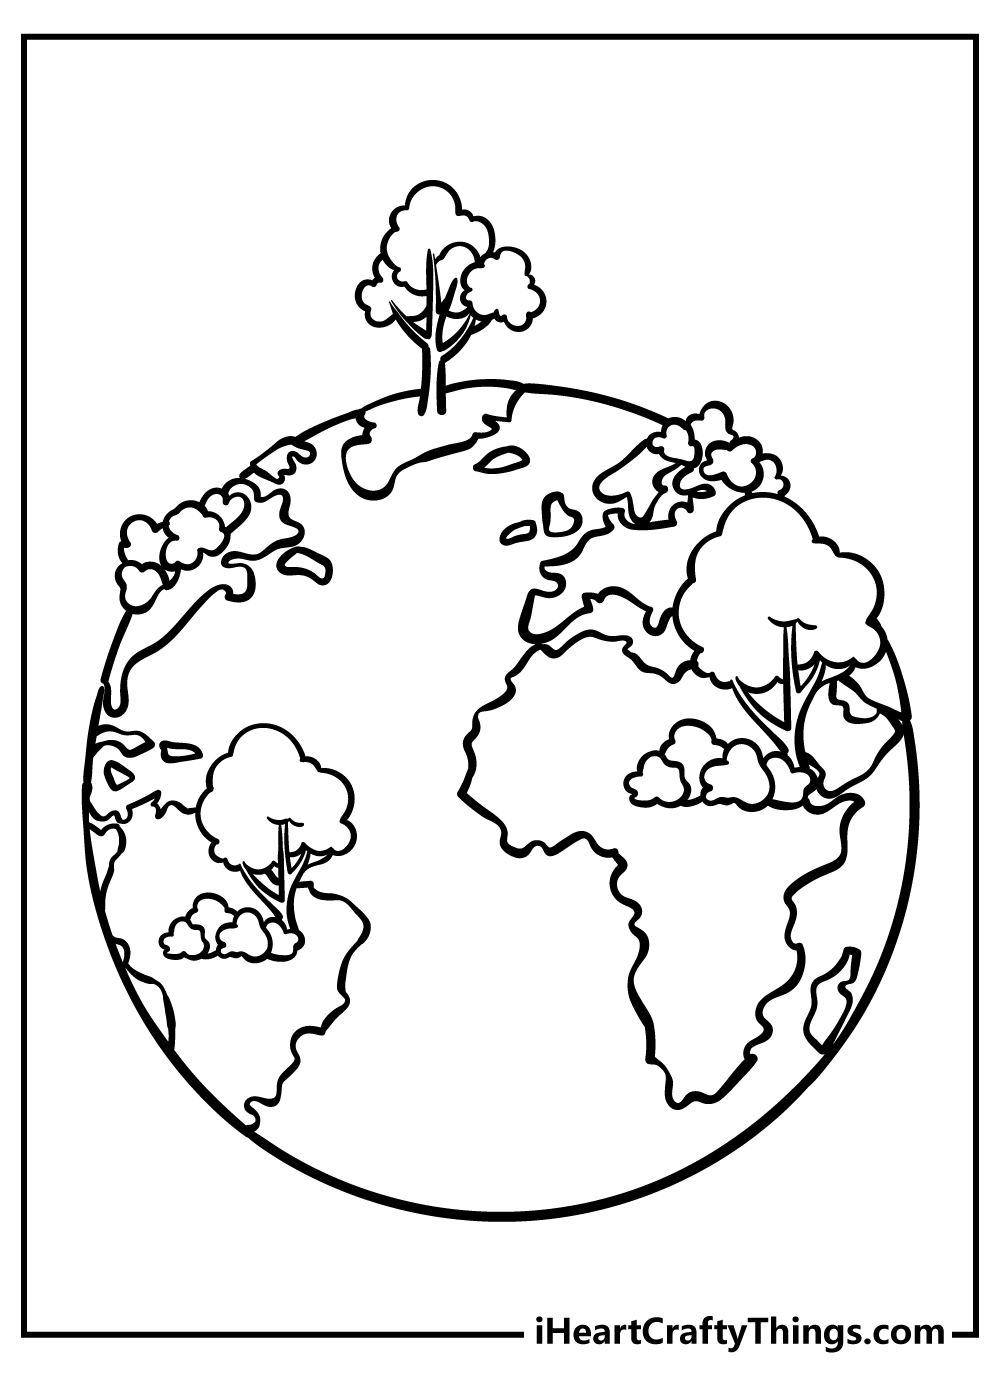 Earth Coloring Pages for kids free download